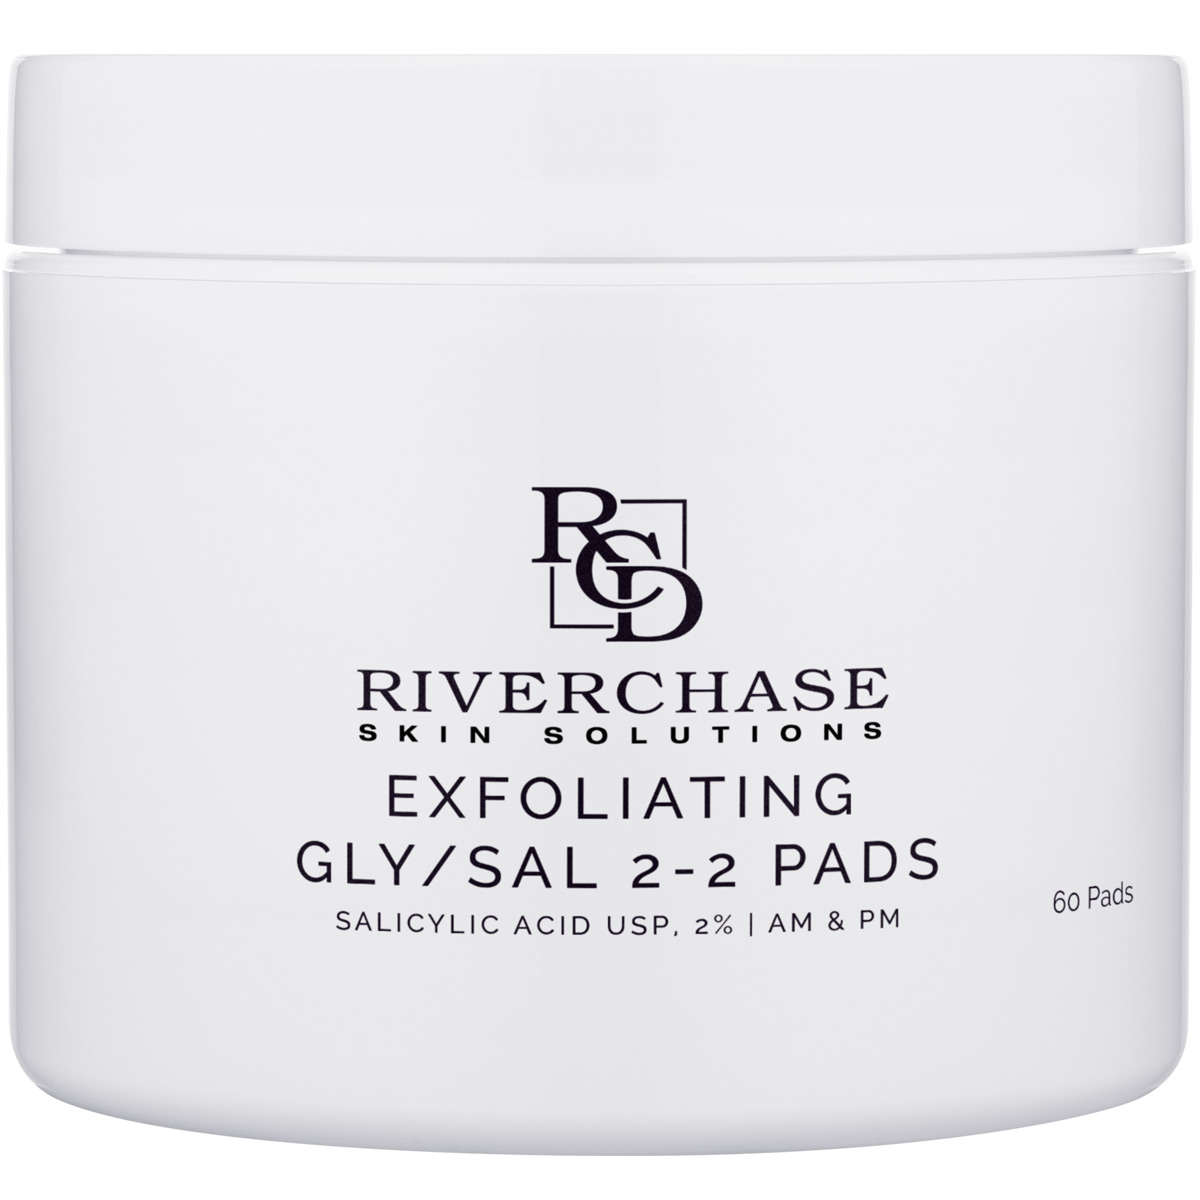 Exfoliating Gly/Sal 2-2 Pads